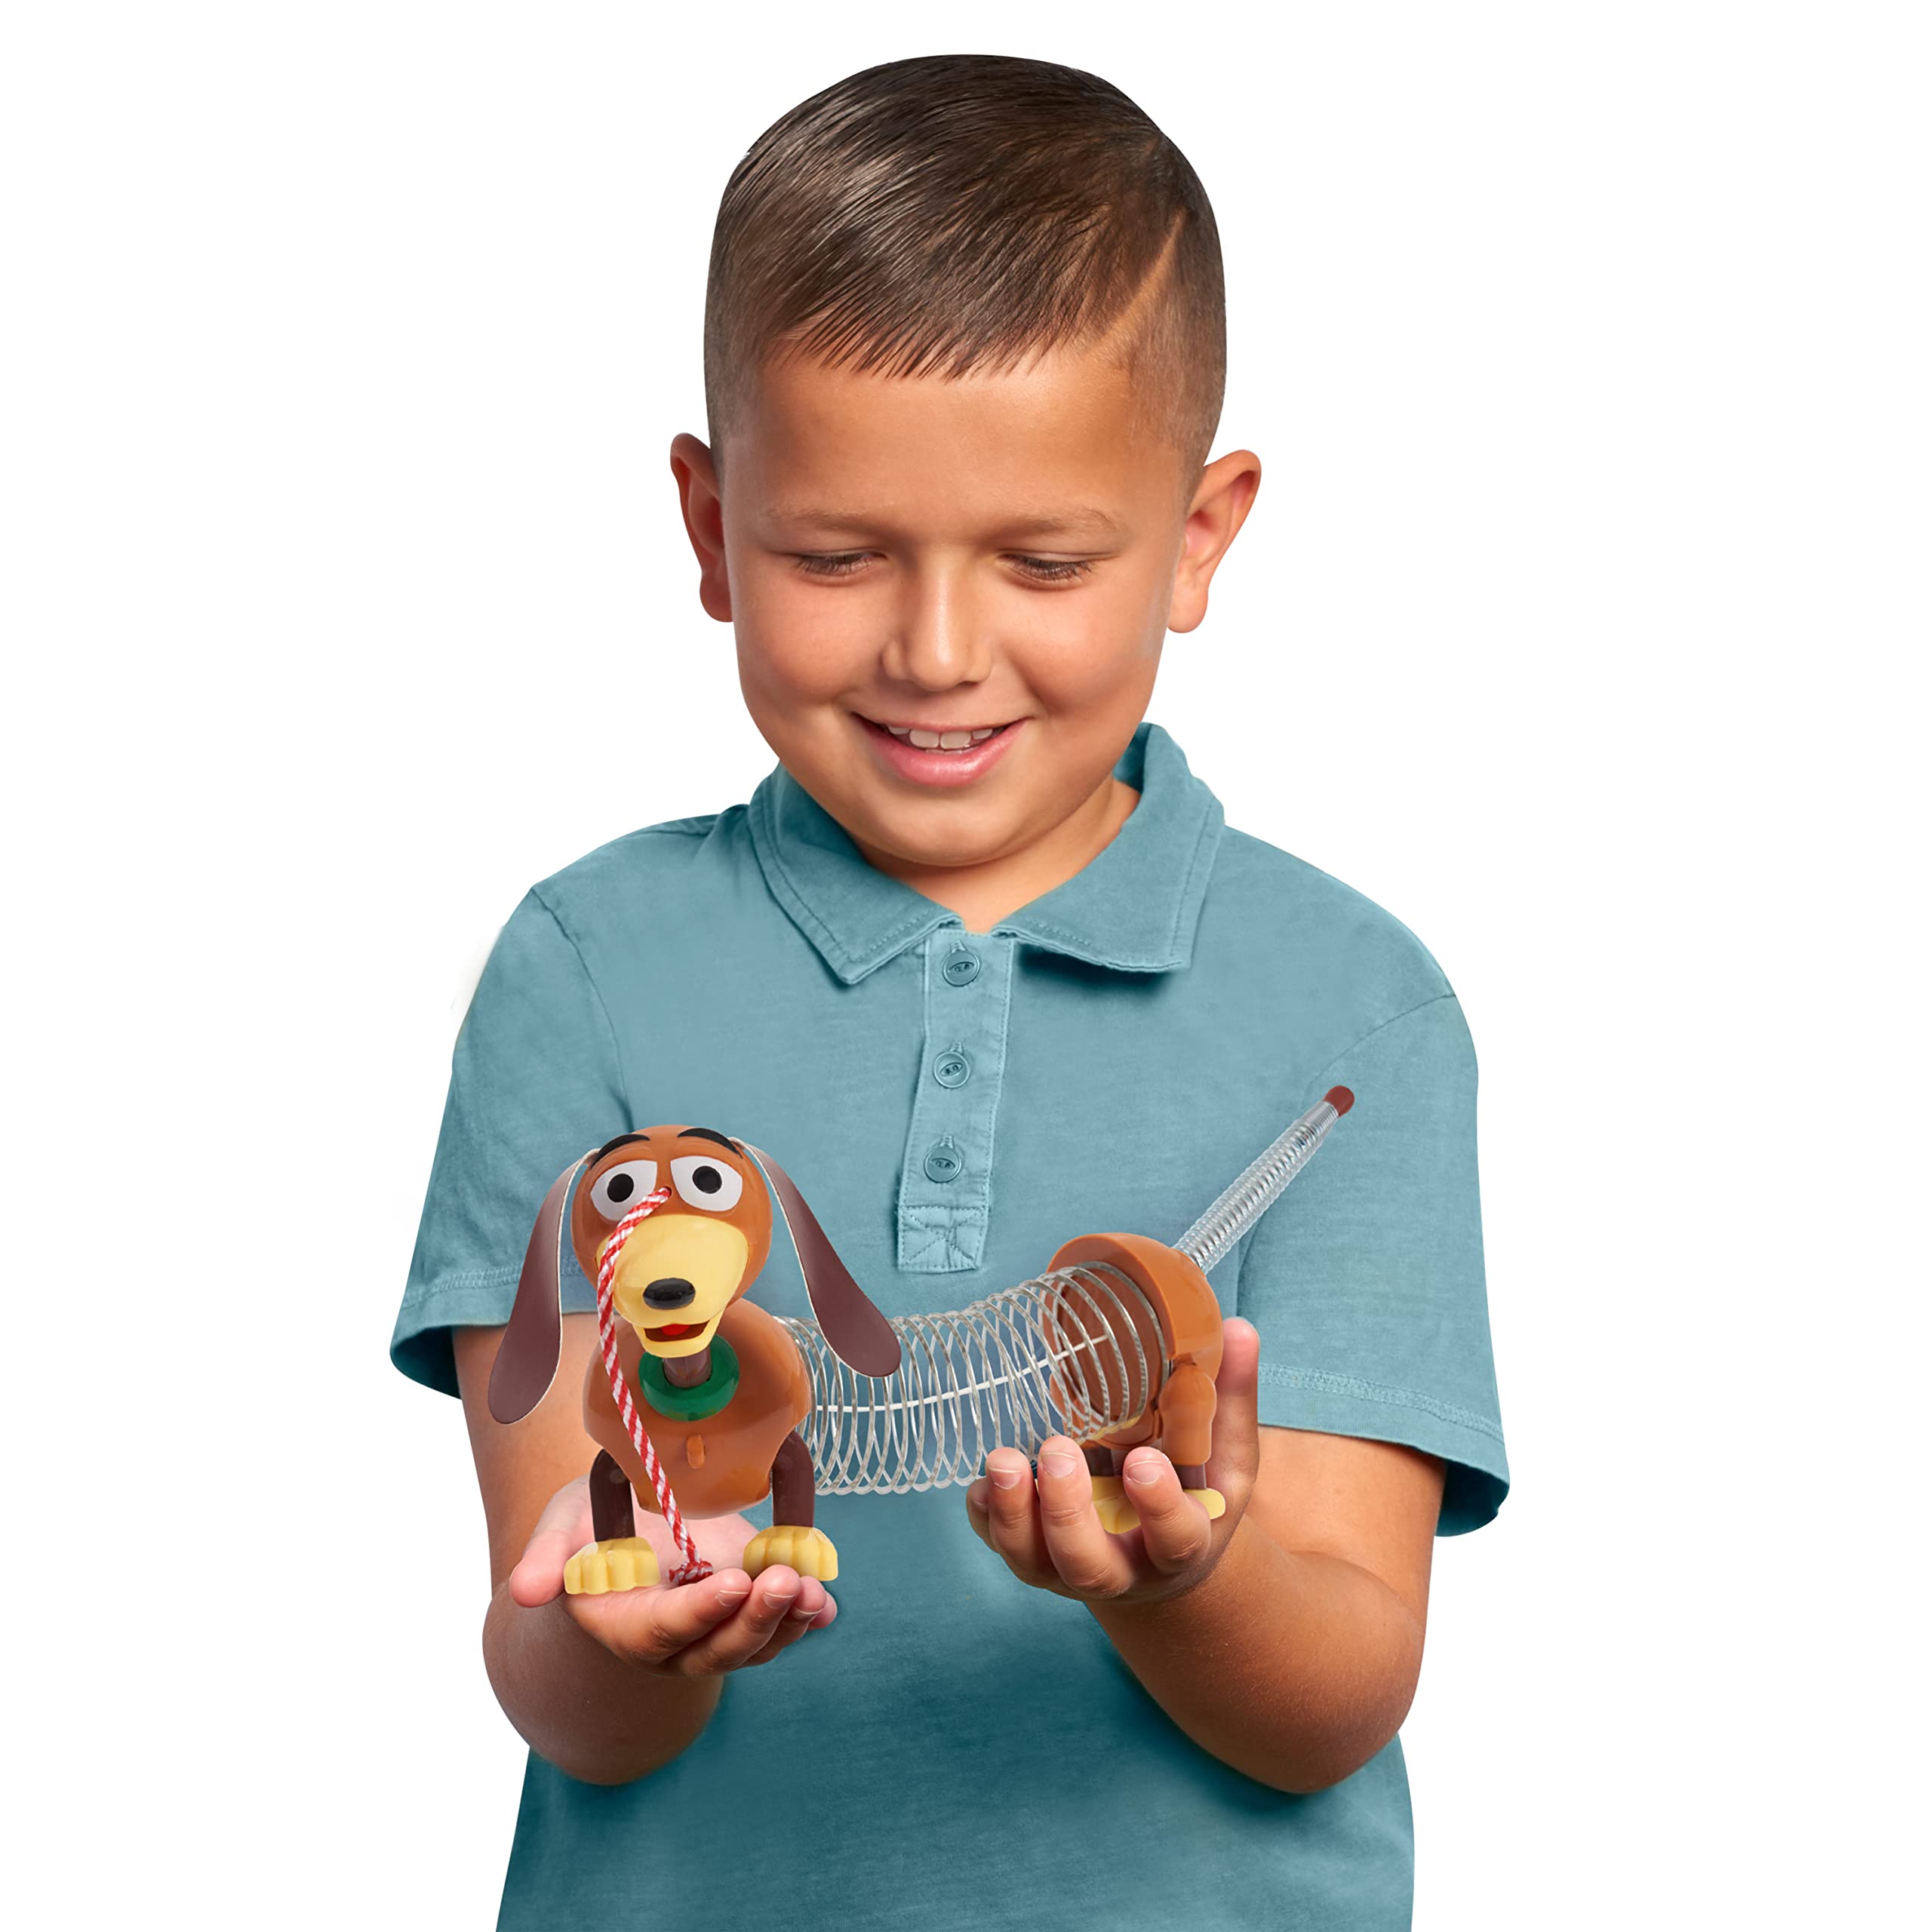 Disney and Pixar Toy Story Slinky Dog Jr Pull Toy, Toys for 3 Year Old Girls and Boys, by Just Play